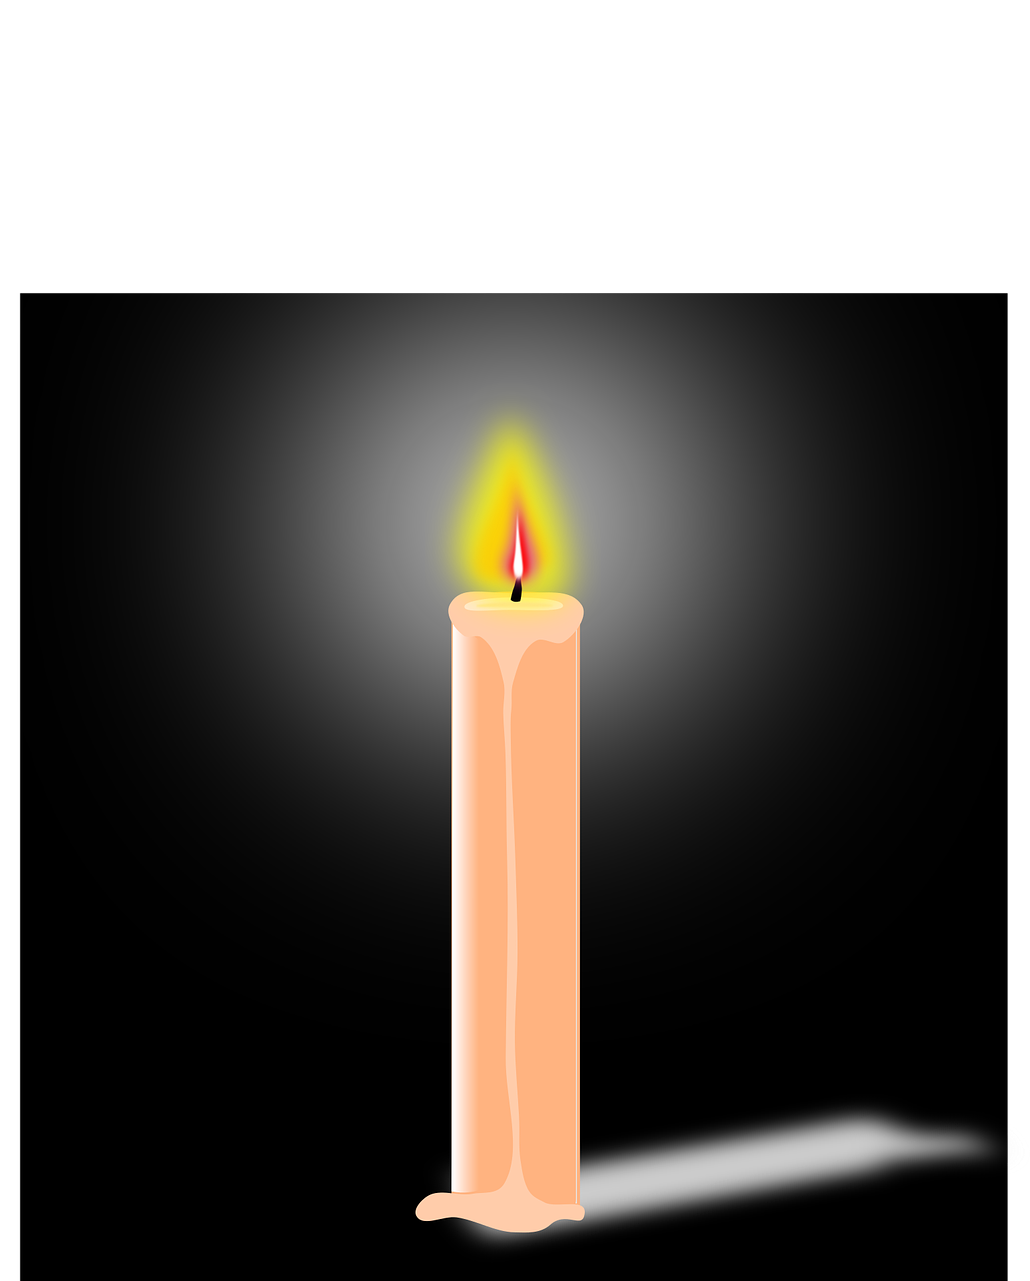 Candle Flame Illustration PNG